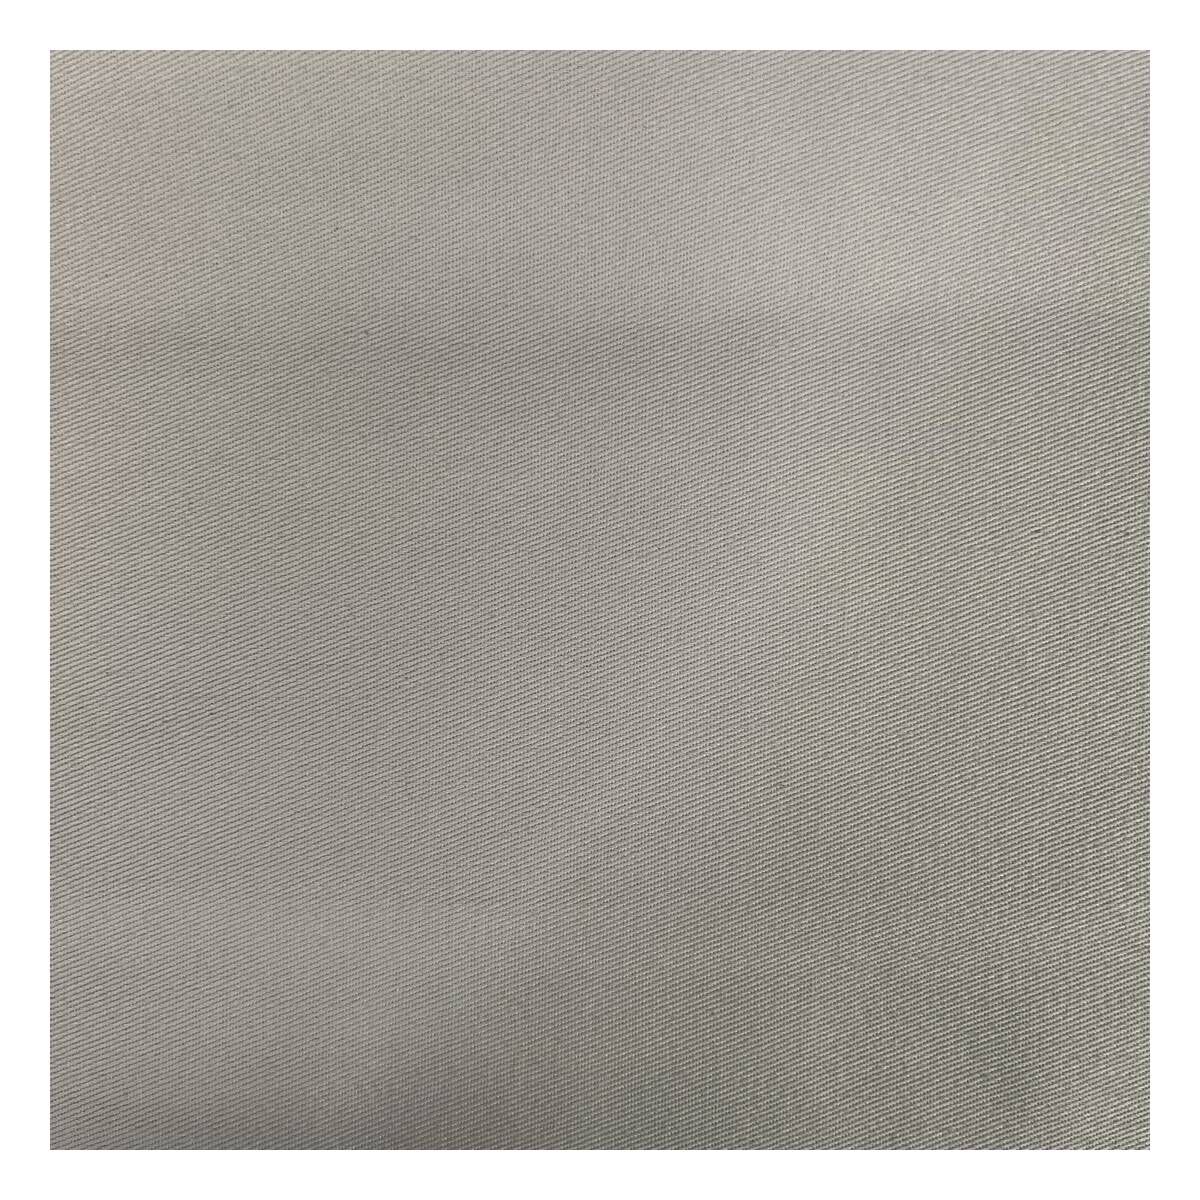 Silver Lightweight Drill Fabric by the Metre | Hobbycraft